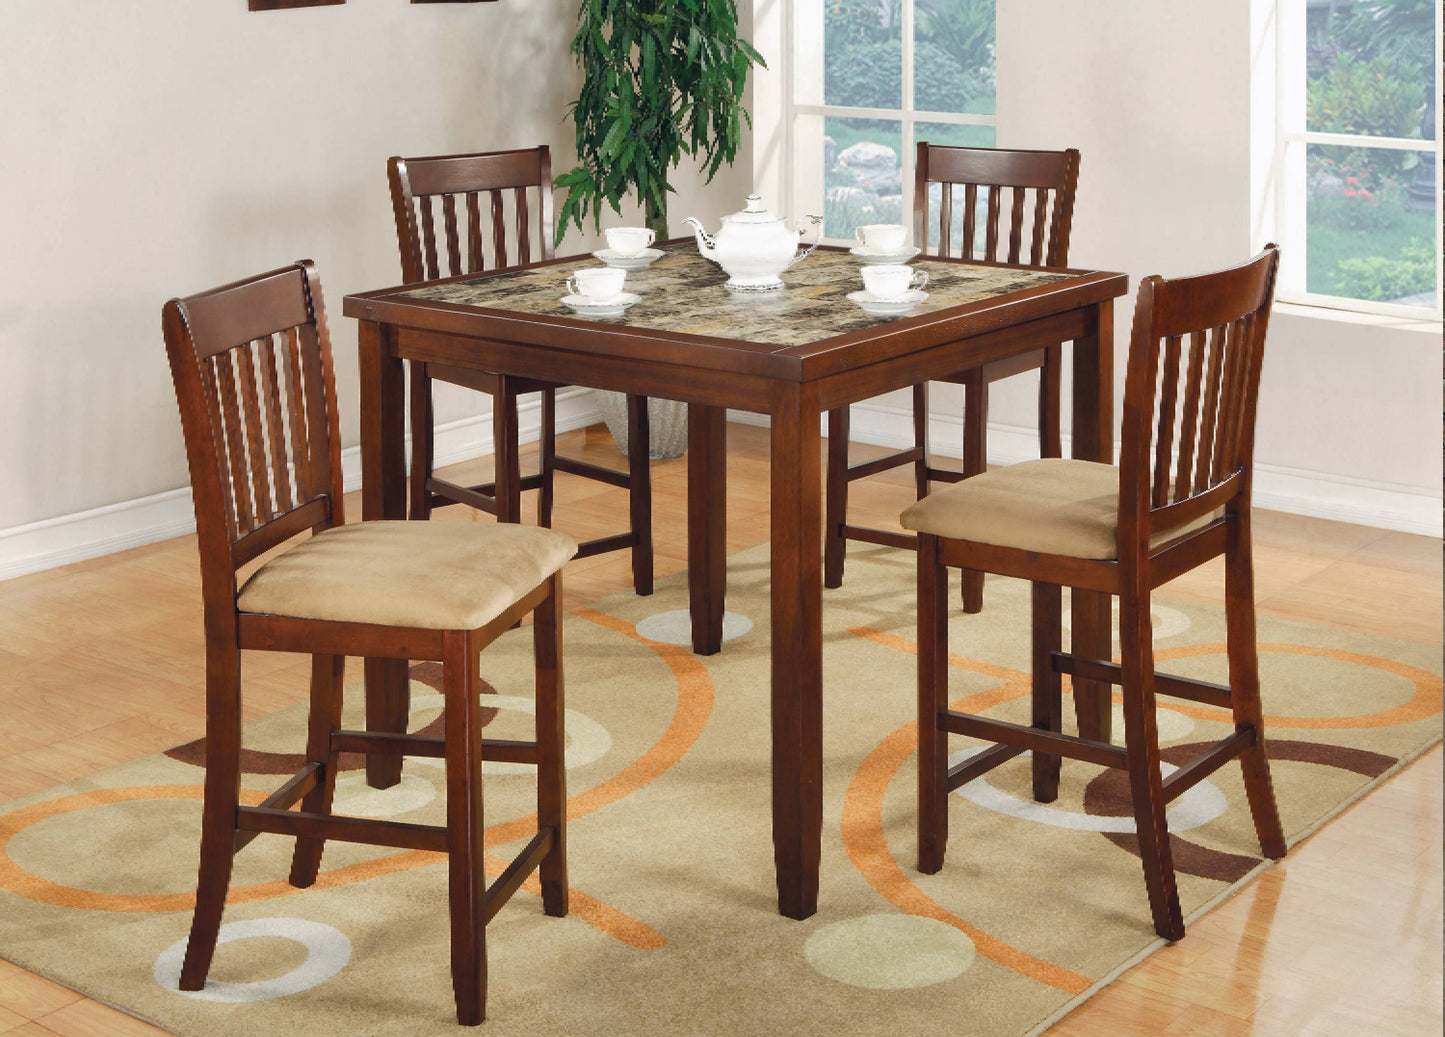 5-Piece Counter Height Dining Set Red Brown And Tan - 150154